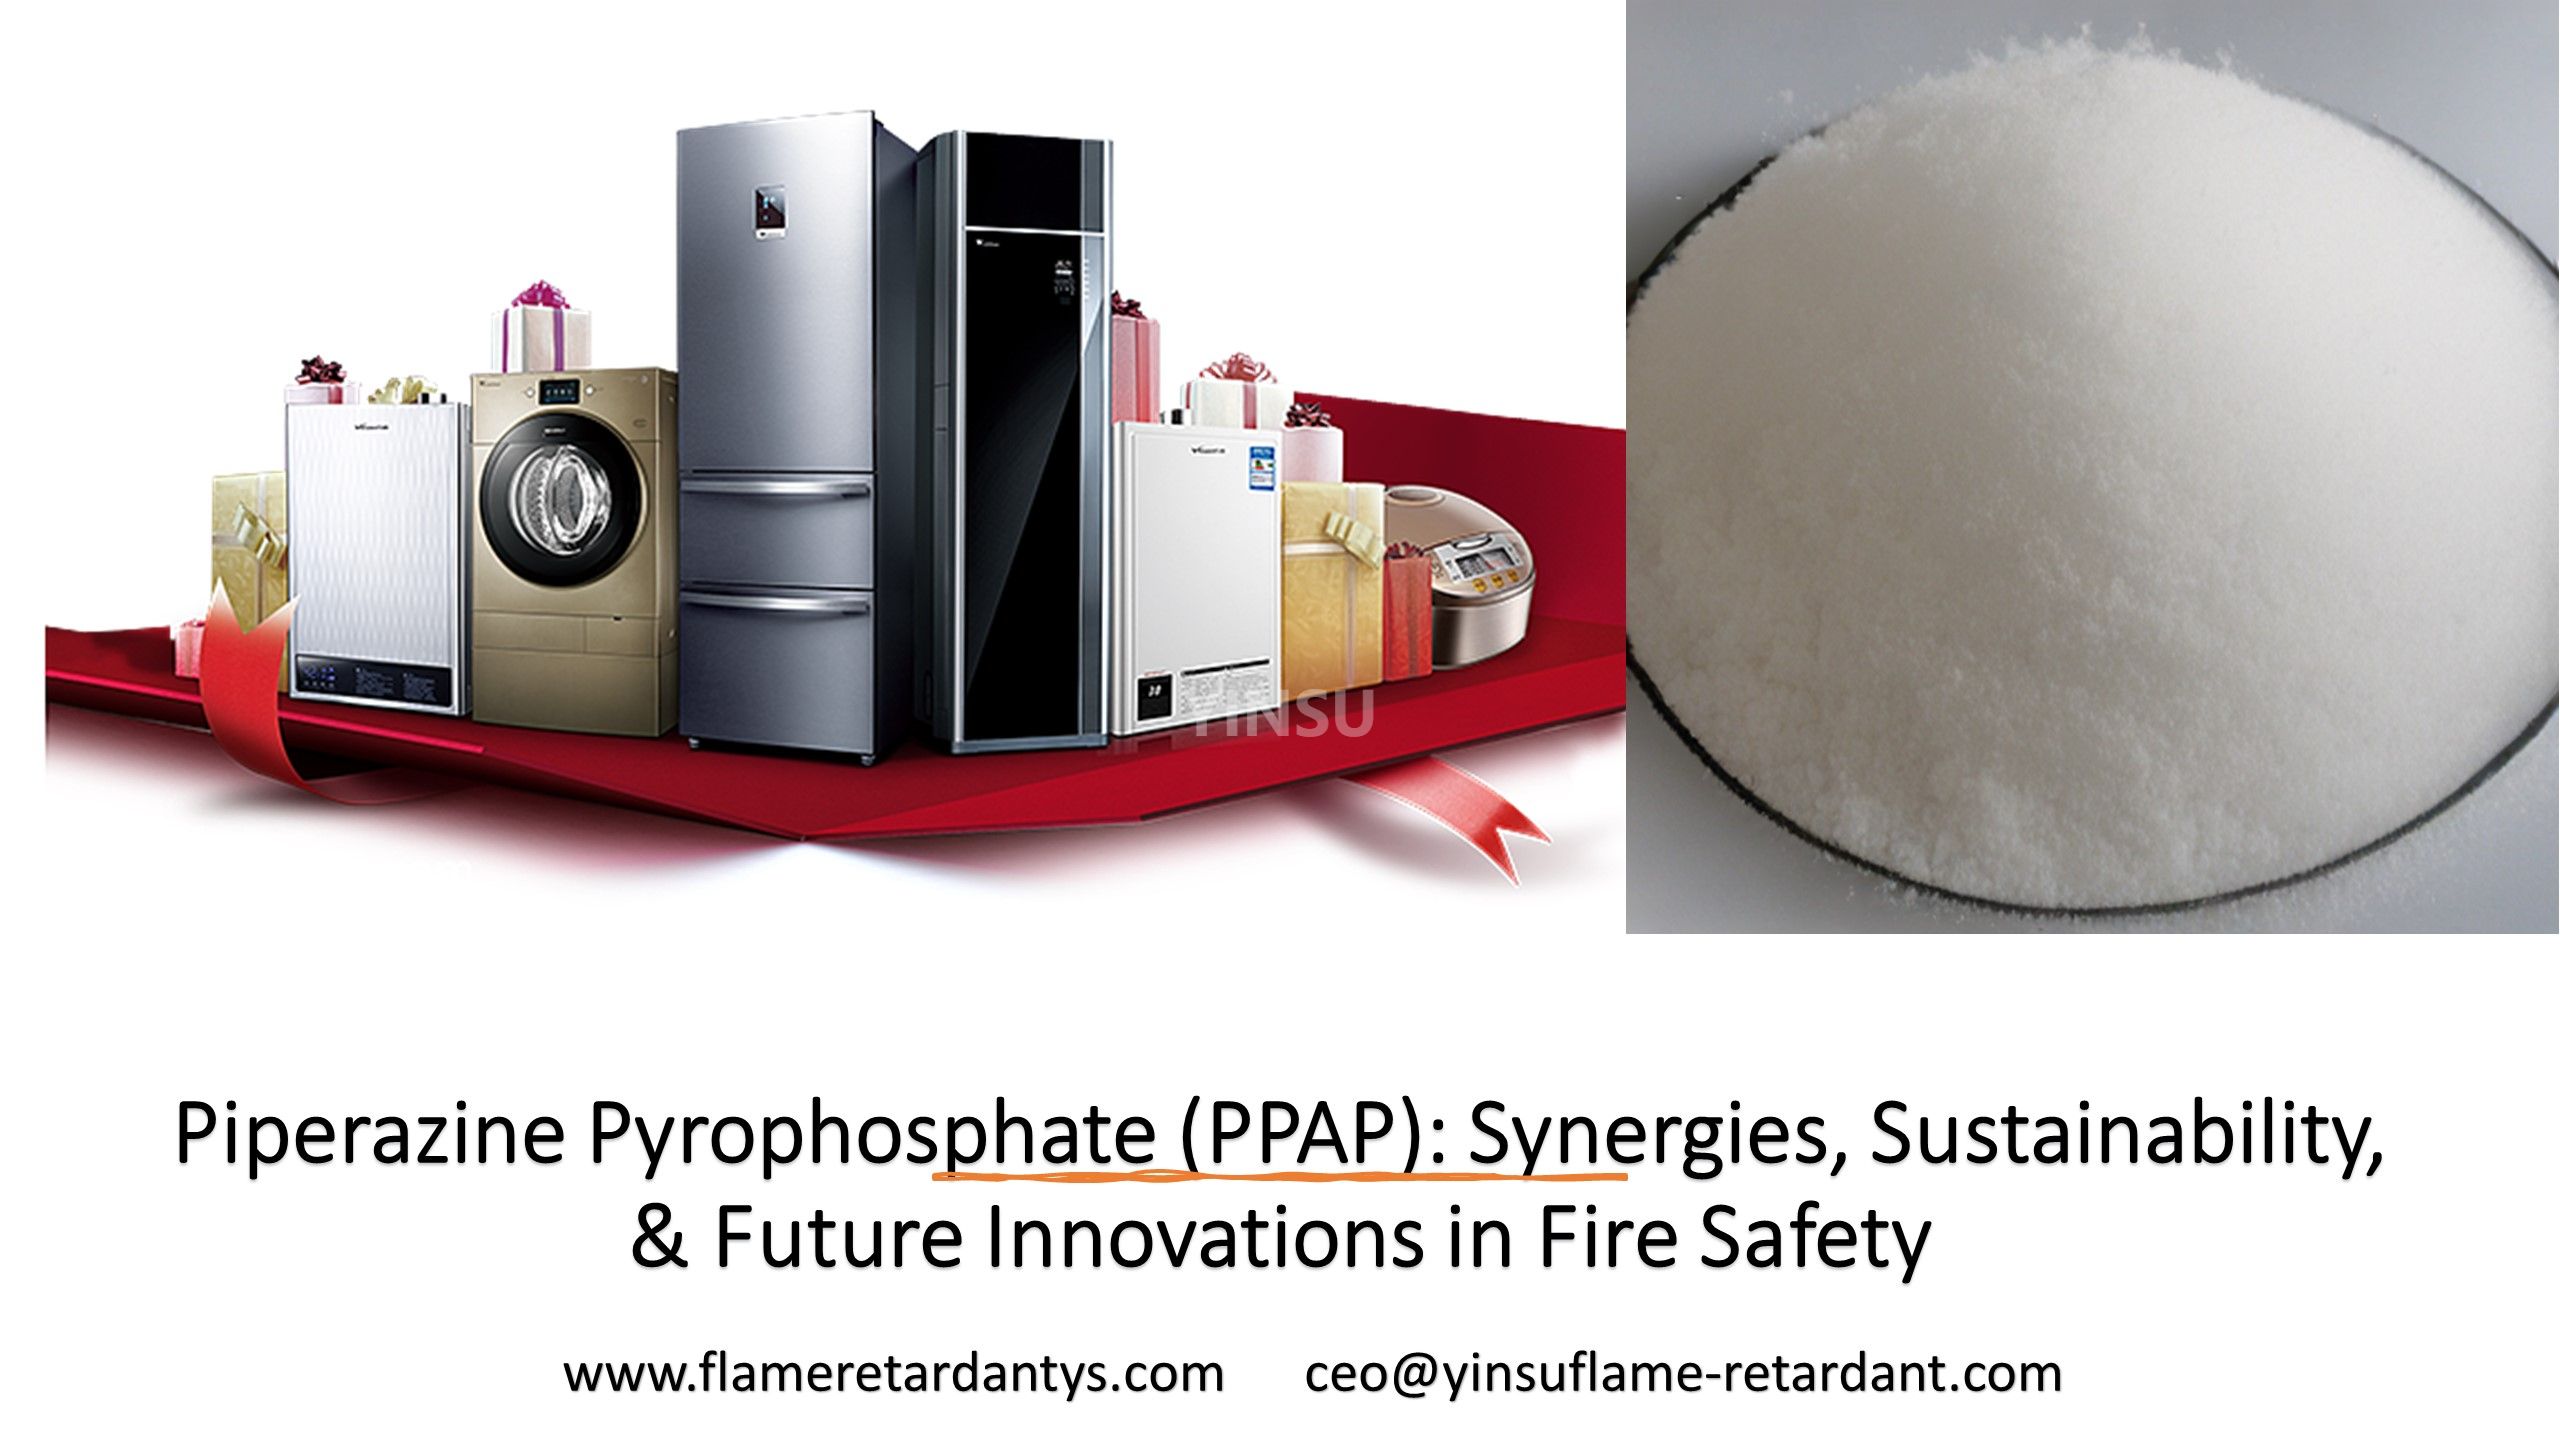 Piperazine Pyrophosphate (PPAP): Synergies, Sustainability, & Future Innovations in Fire Safety